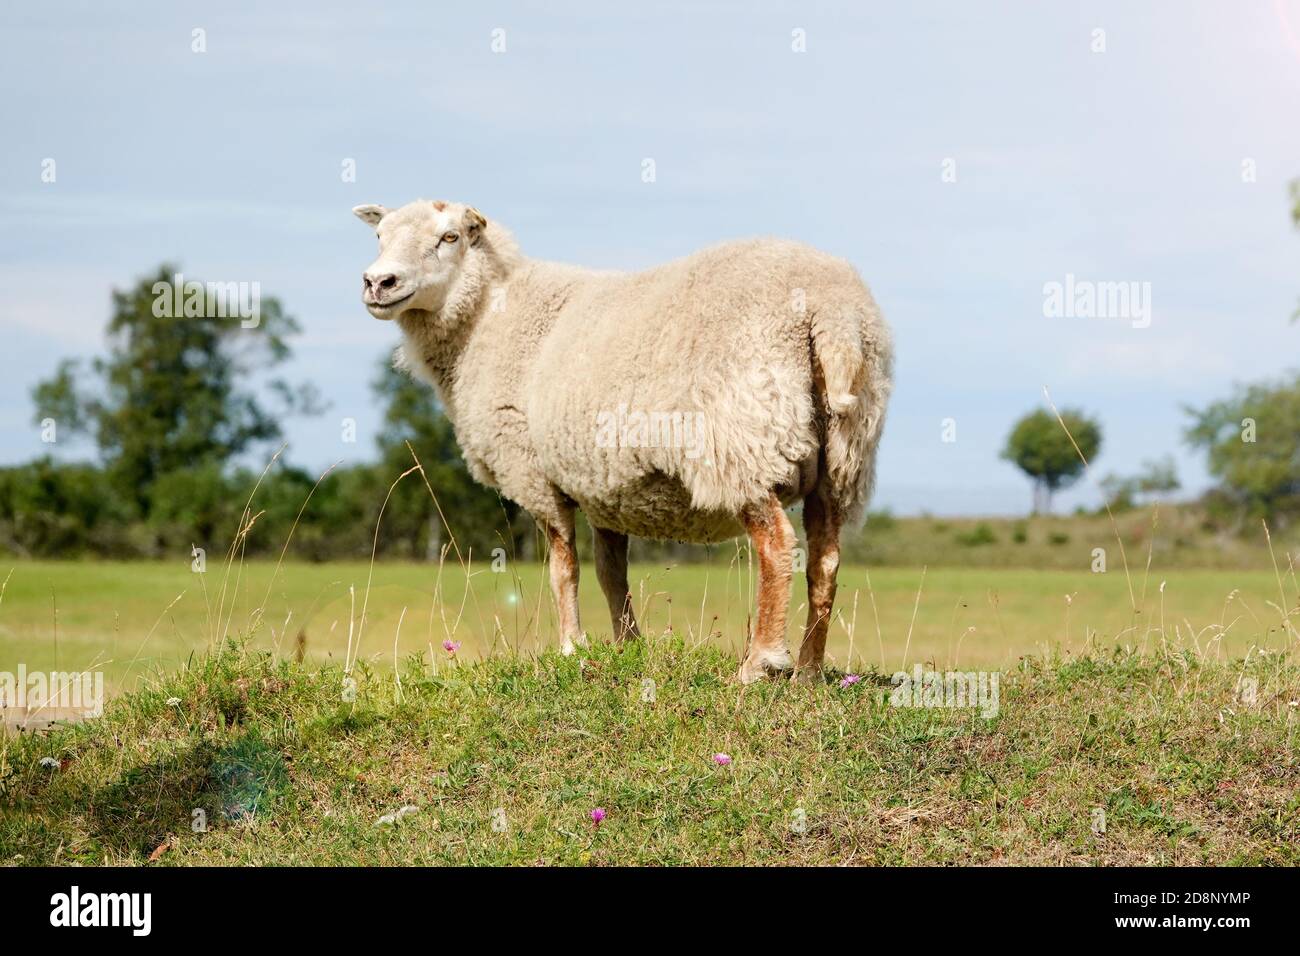 smiling sheep standing at sunlight. Summertime in Farmland. Wild animals - sheep portrait. Farmland View of a Woolly Sheep in a Green forest Field Stock Photo